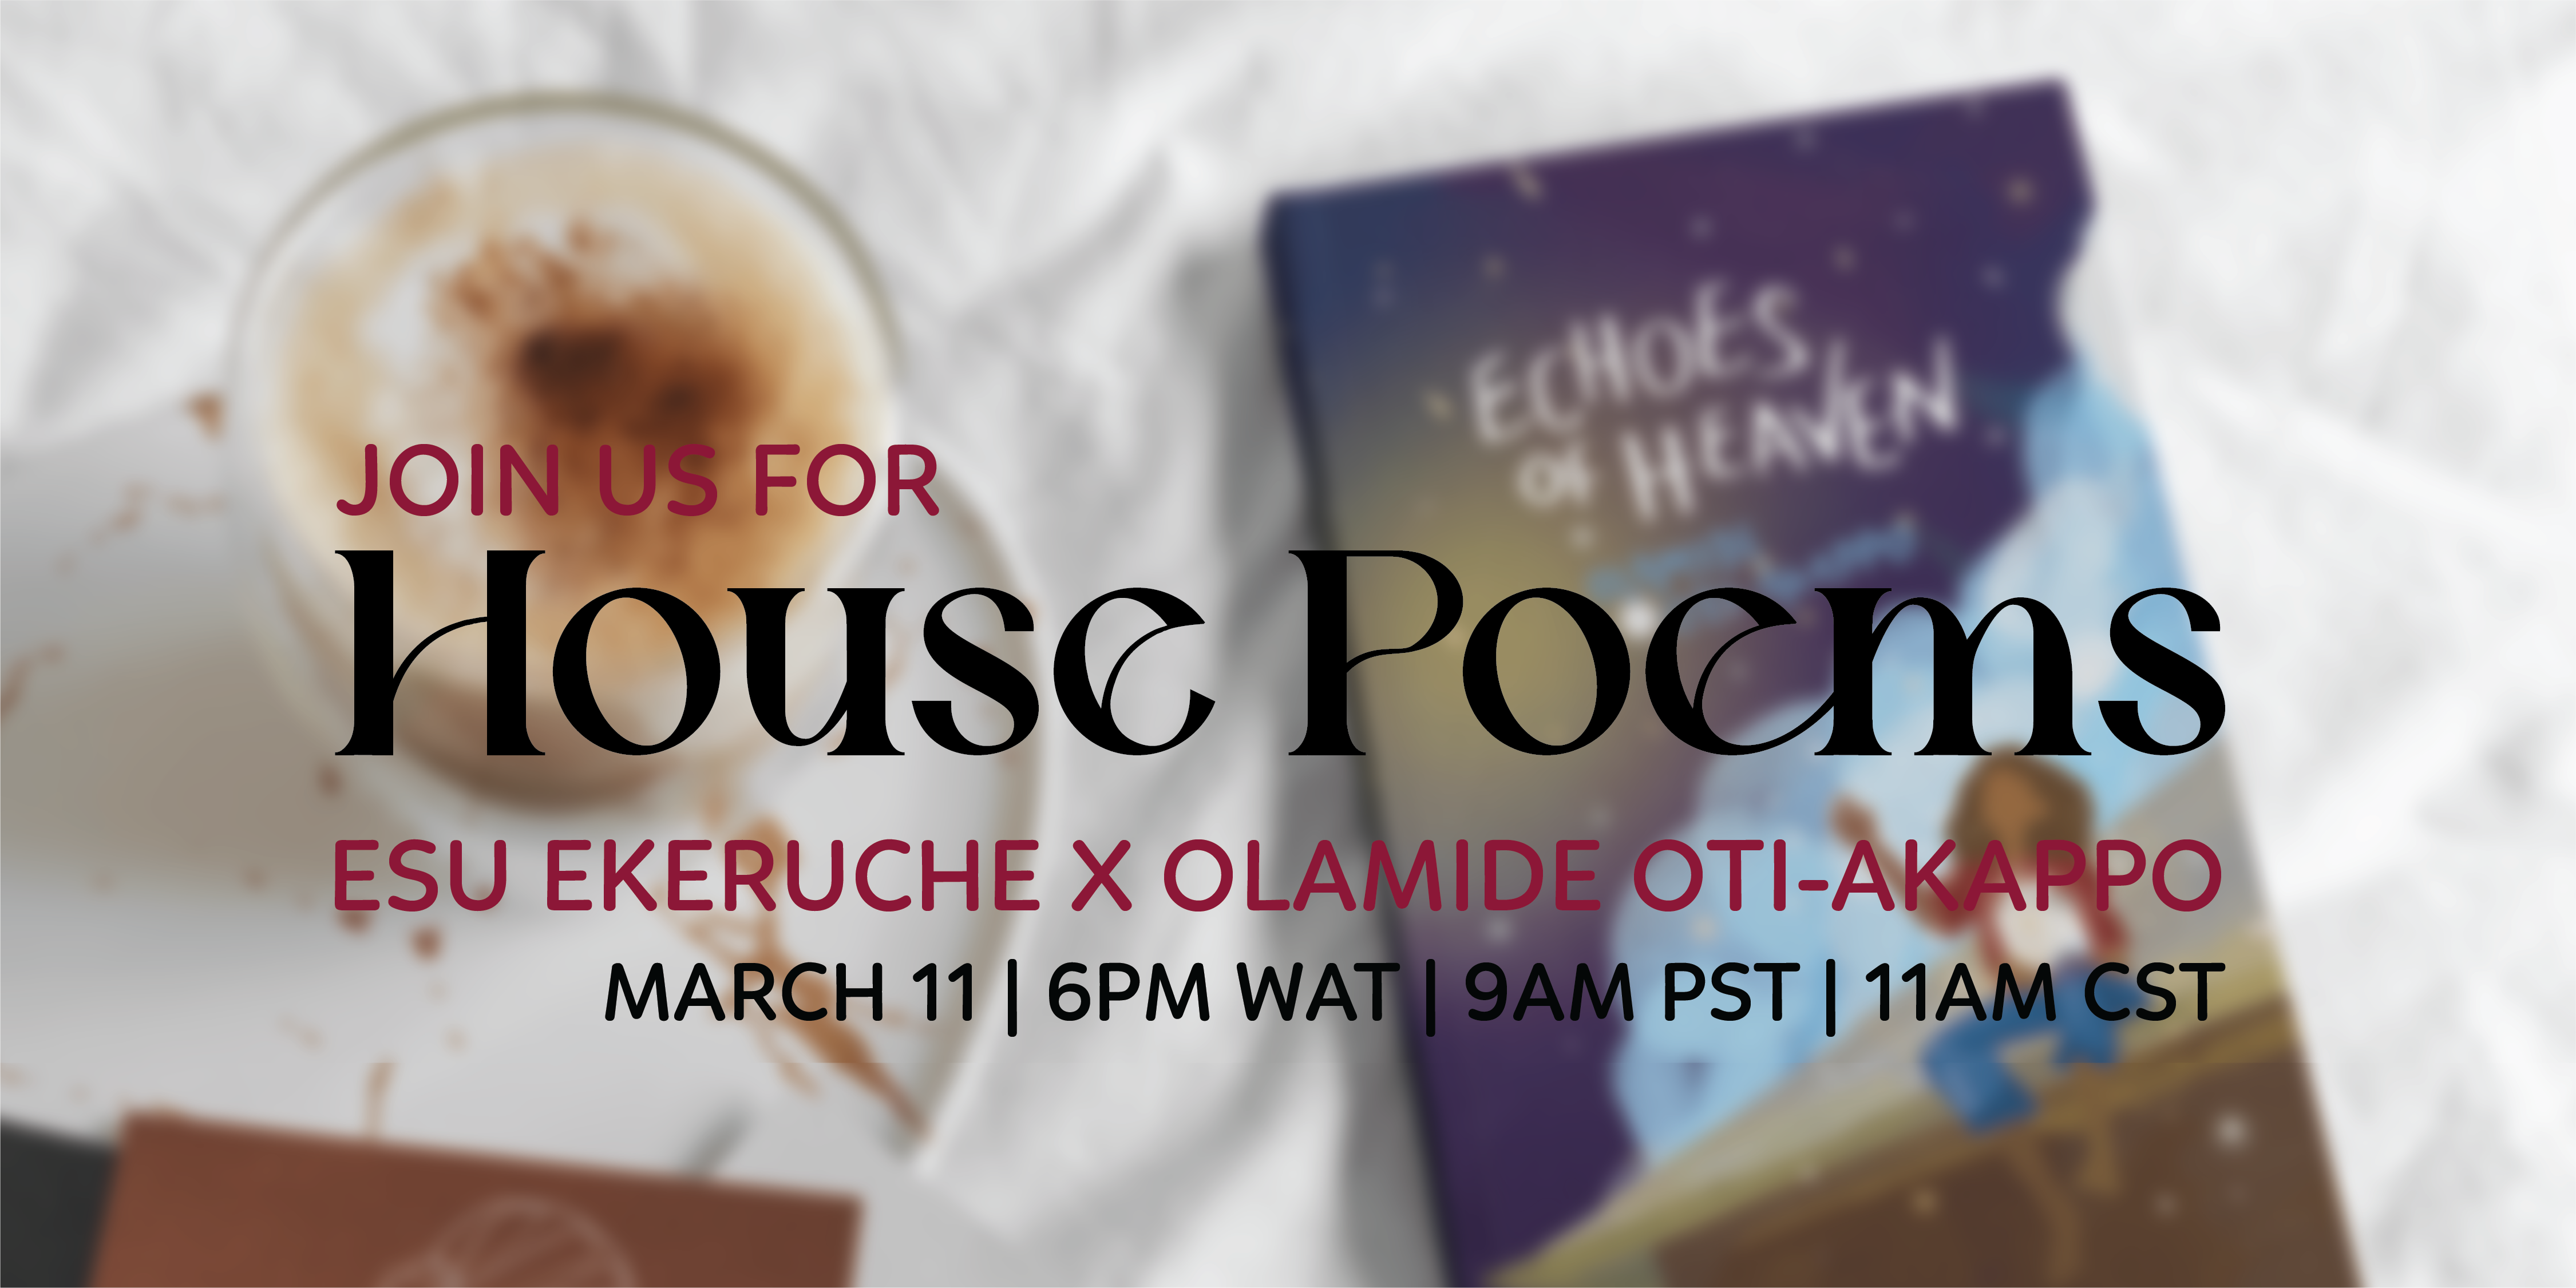 You are invited to House Poems